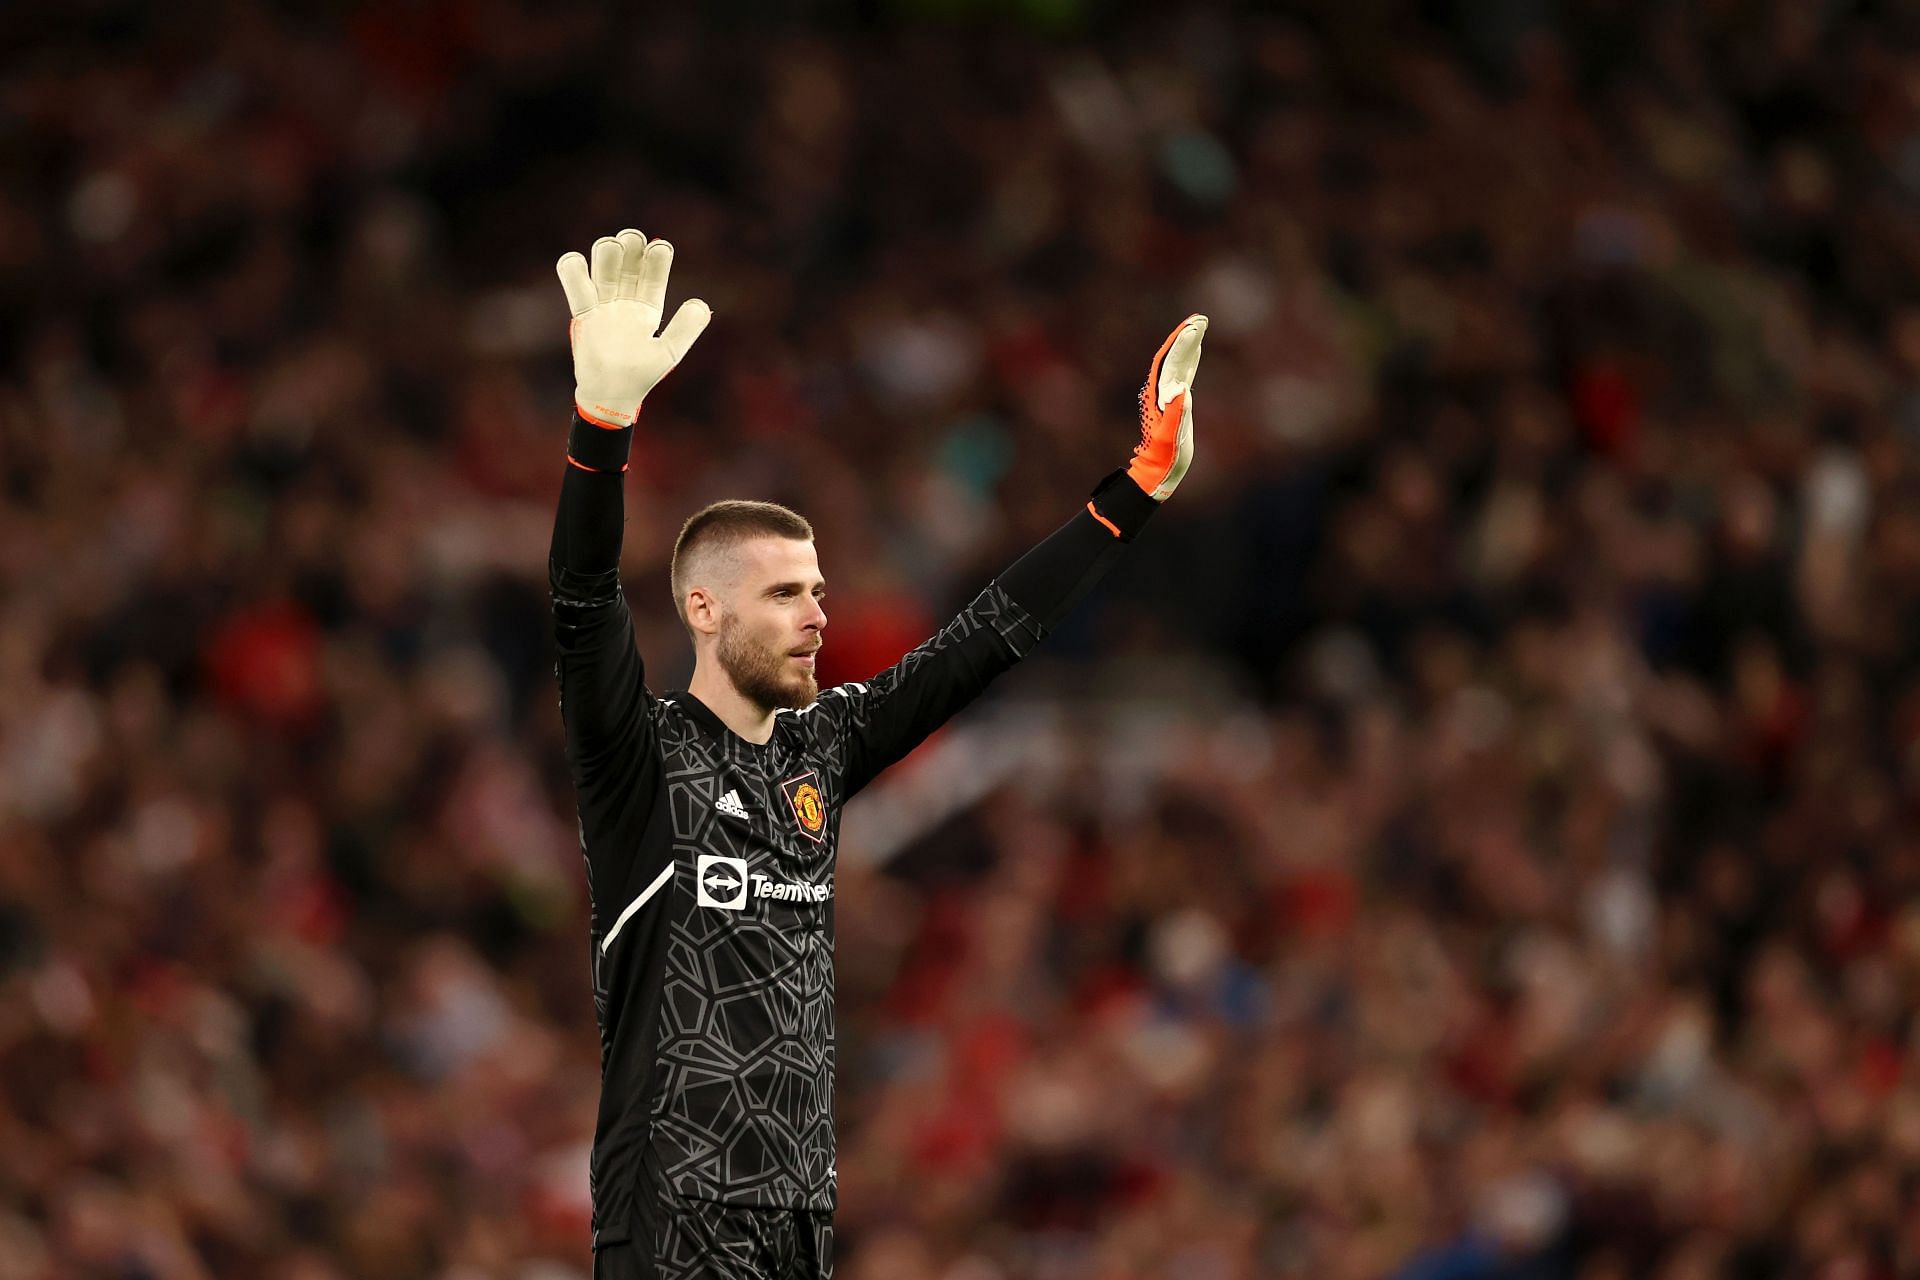 De Gea leaves Manchester United after 12 years